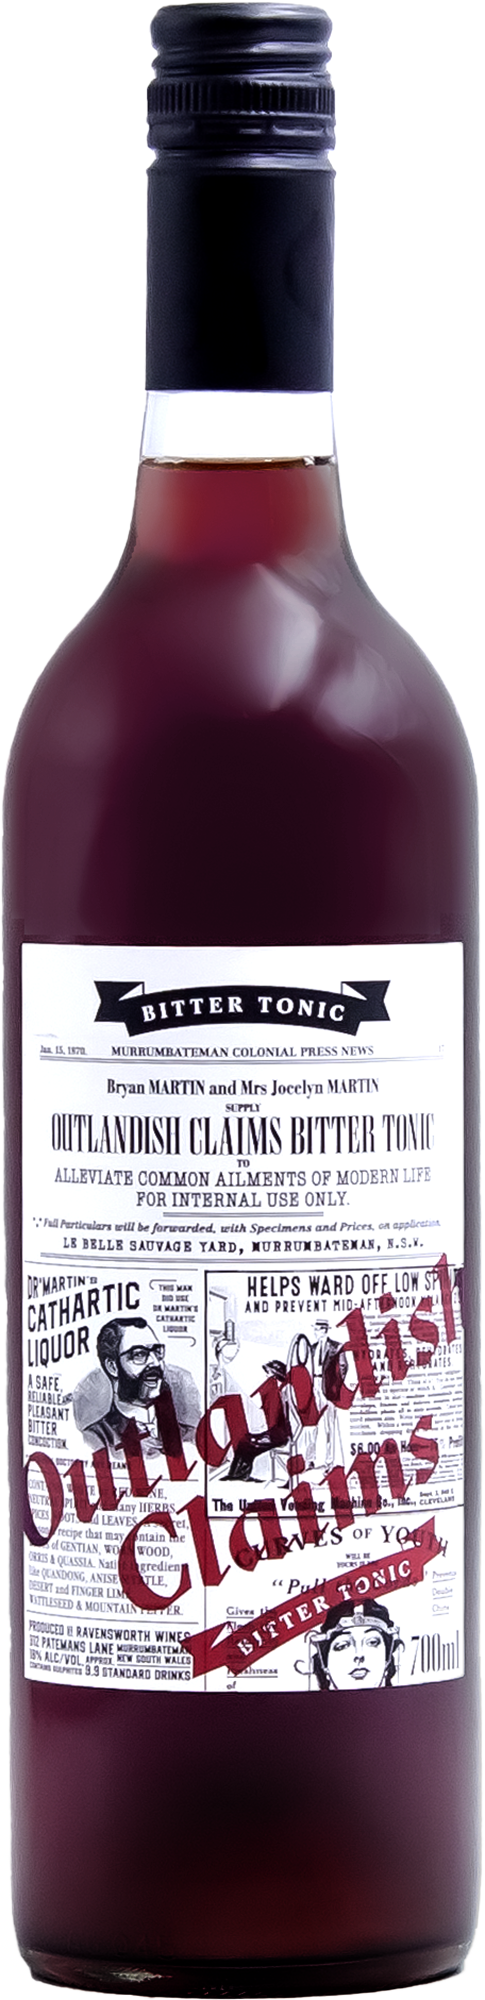 Outlandish Claims Bitter Tonic Red